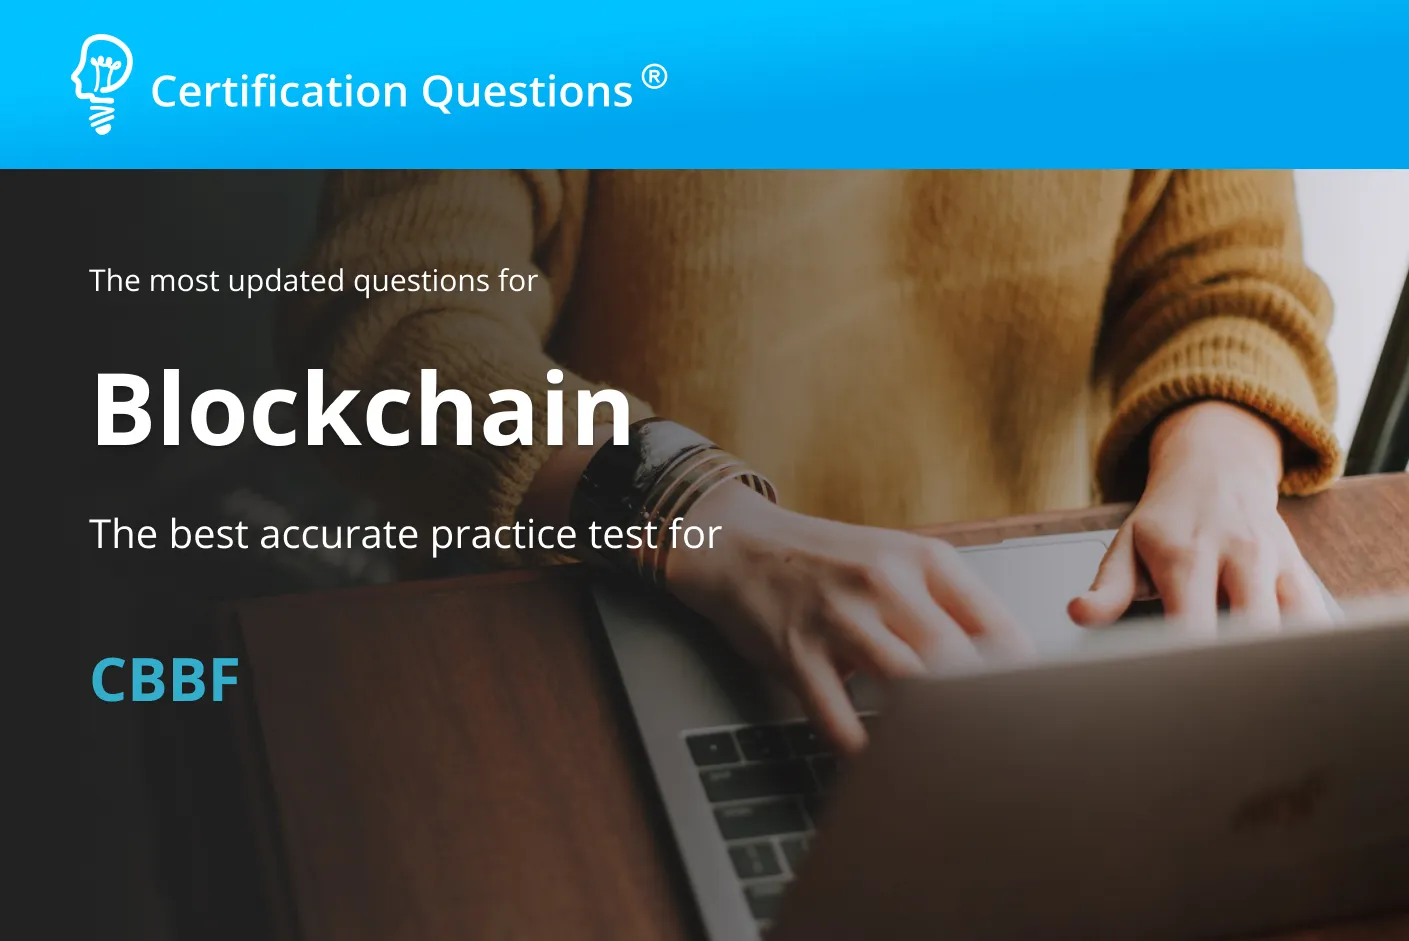 This image is related to Blockchain CBBF practice test